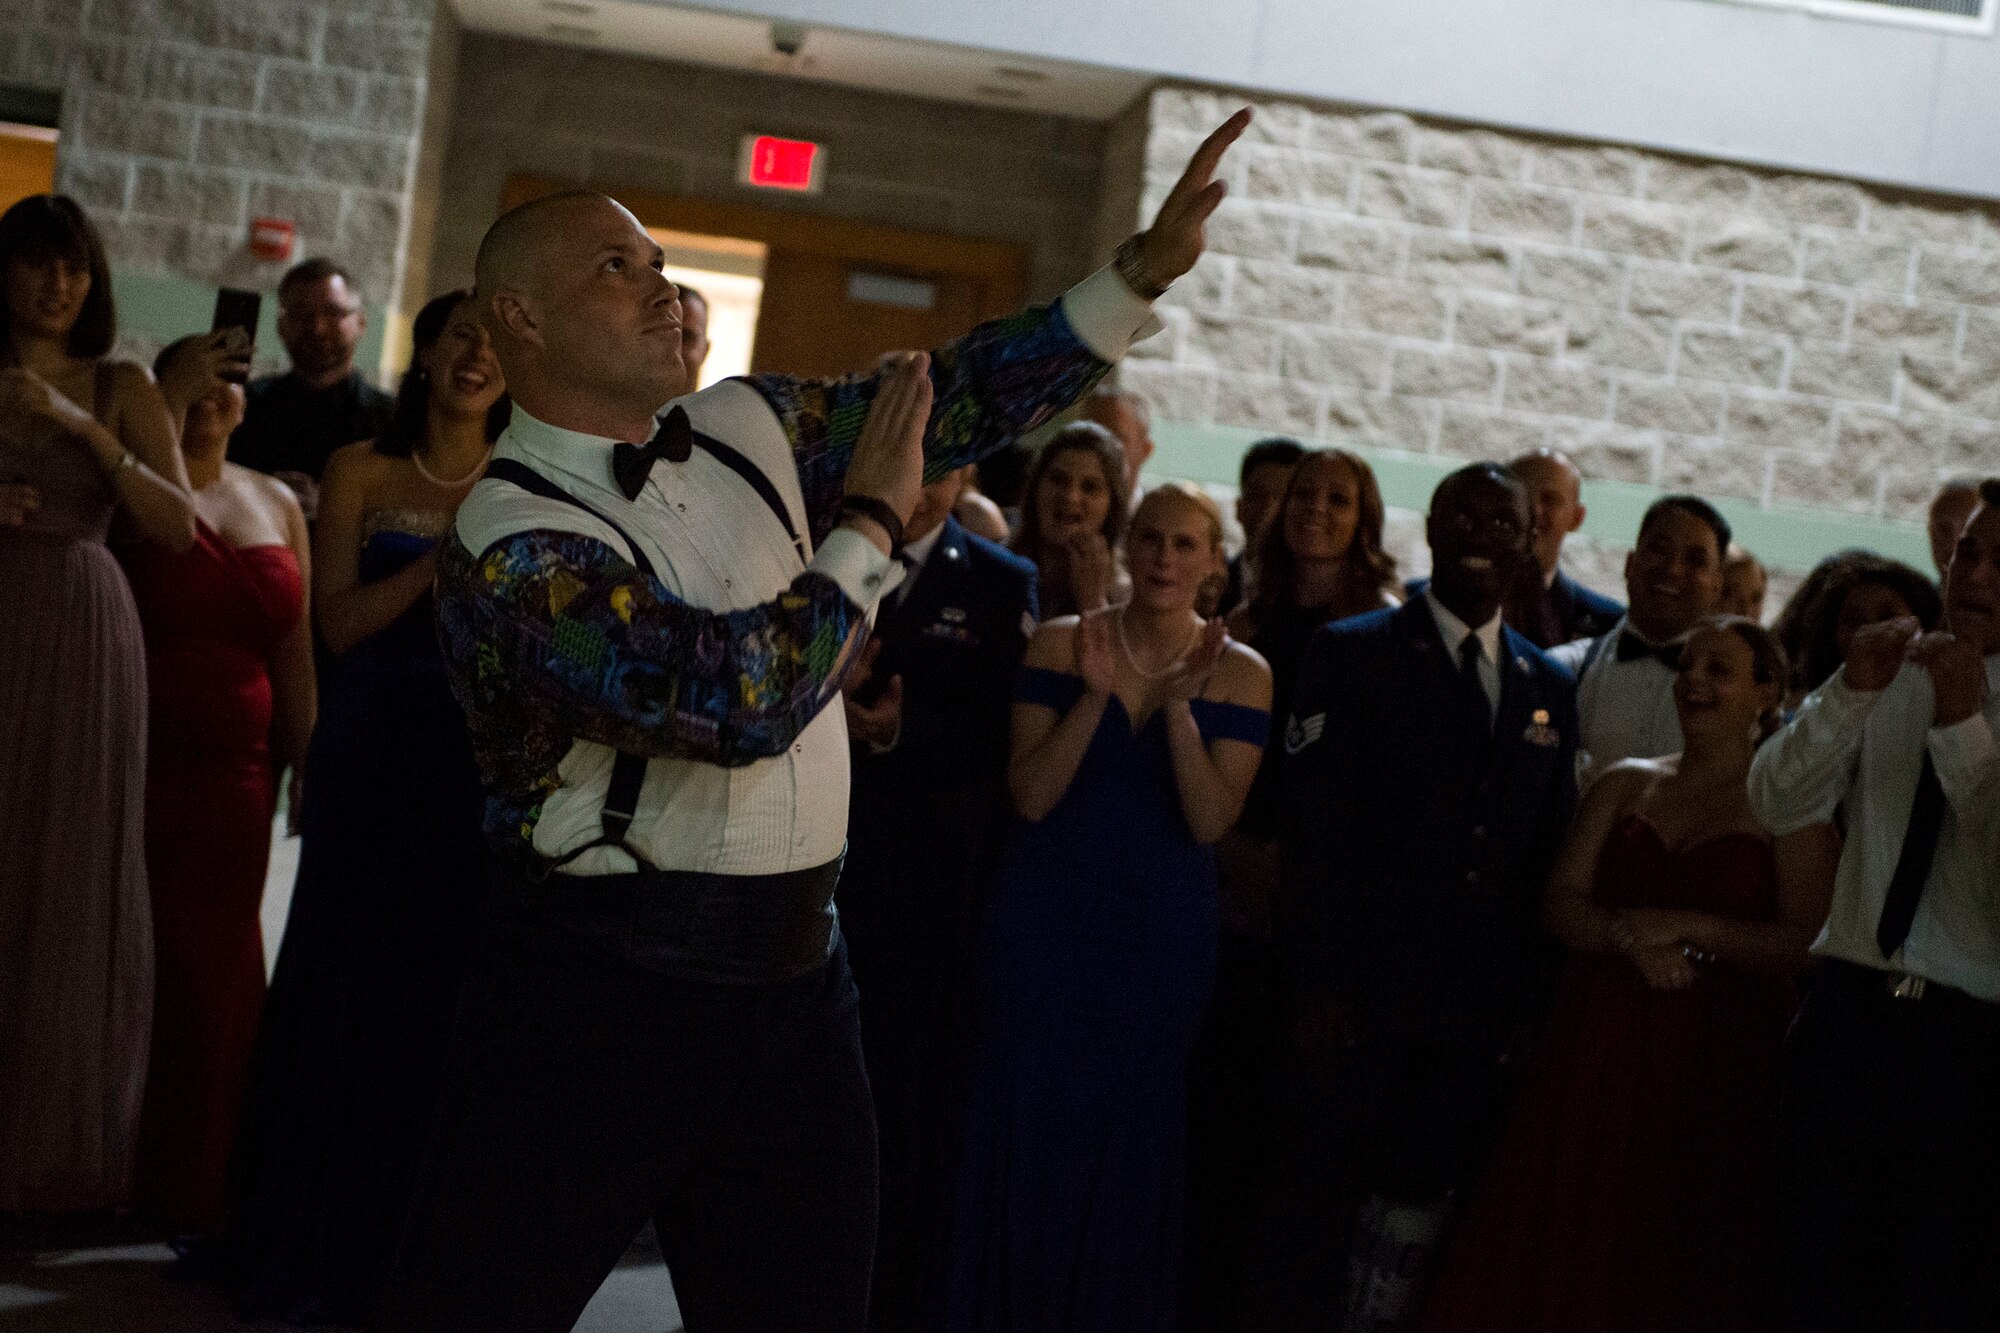 An attendee enjoys the festivities during the Air Force Ball, Sept. 15, 2018, at the James H. Rainwater Conference Center in Valdosta, Ga. Moody’s Air Force Ball was not only a celebration of the Air Force’s 71st Birthday but a way to foster esprit de corps and pride among Airmen through a shared history of exceptional service. (U.S. Air Force photo by Airman 1st Class Erick Requadt)